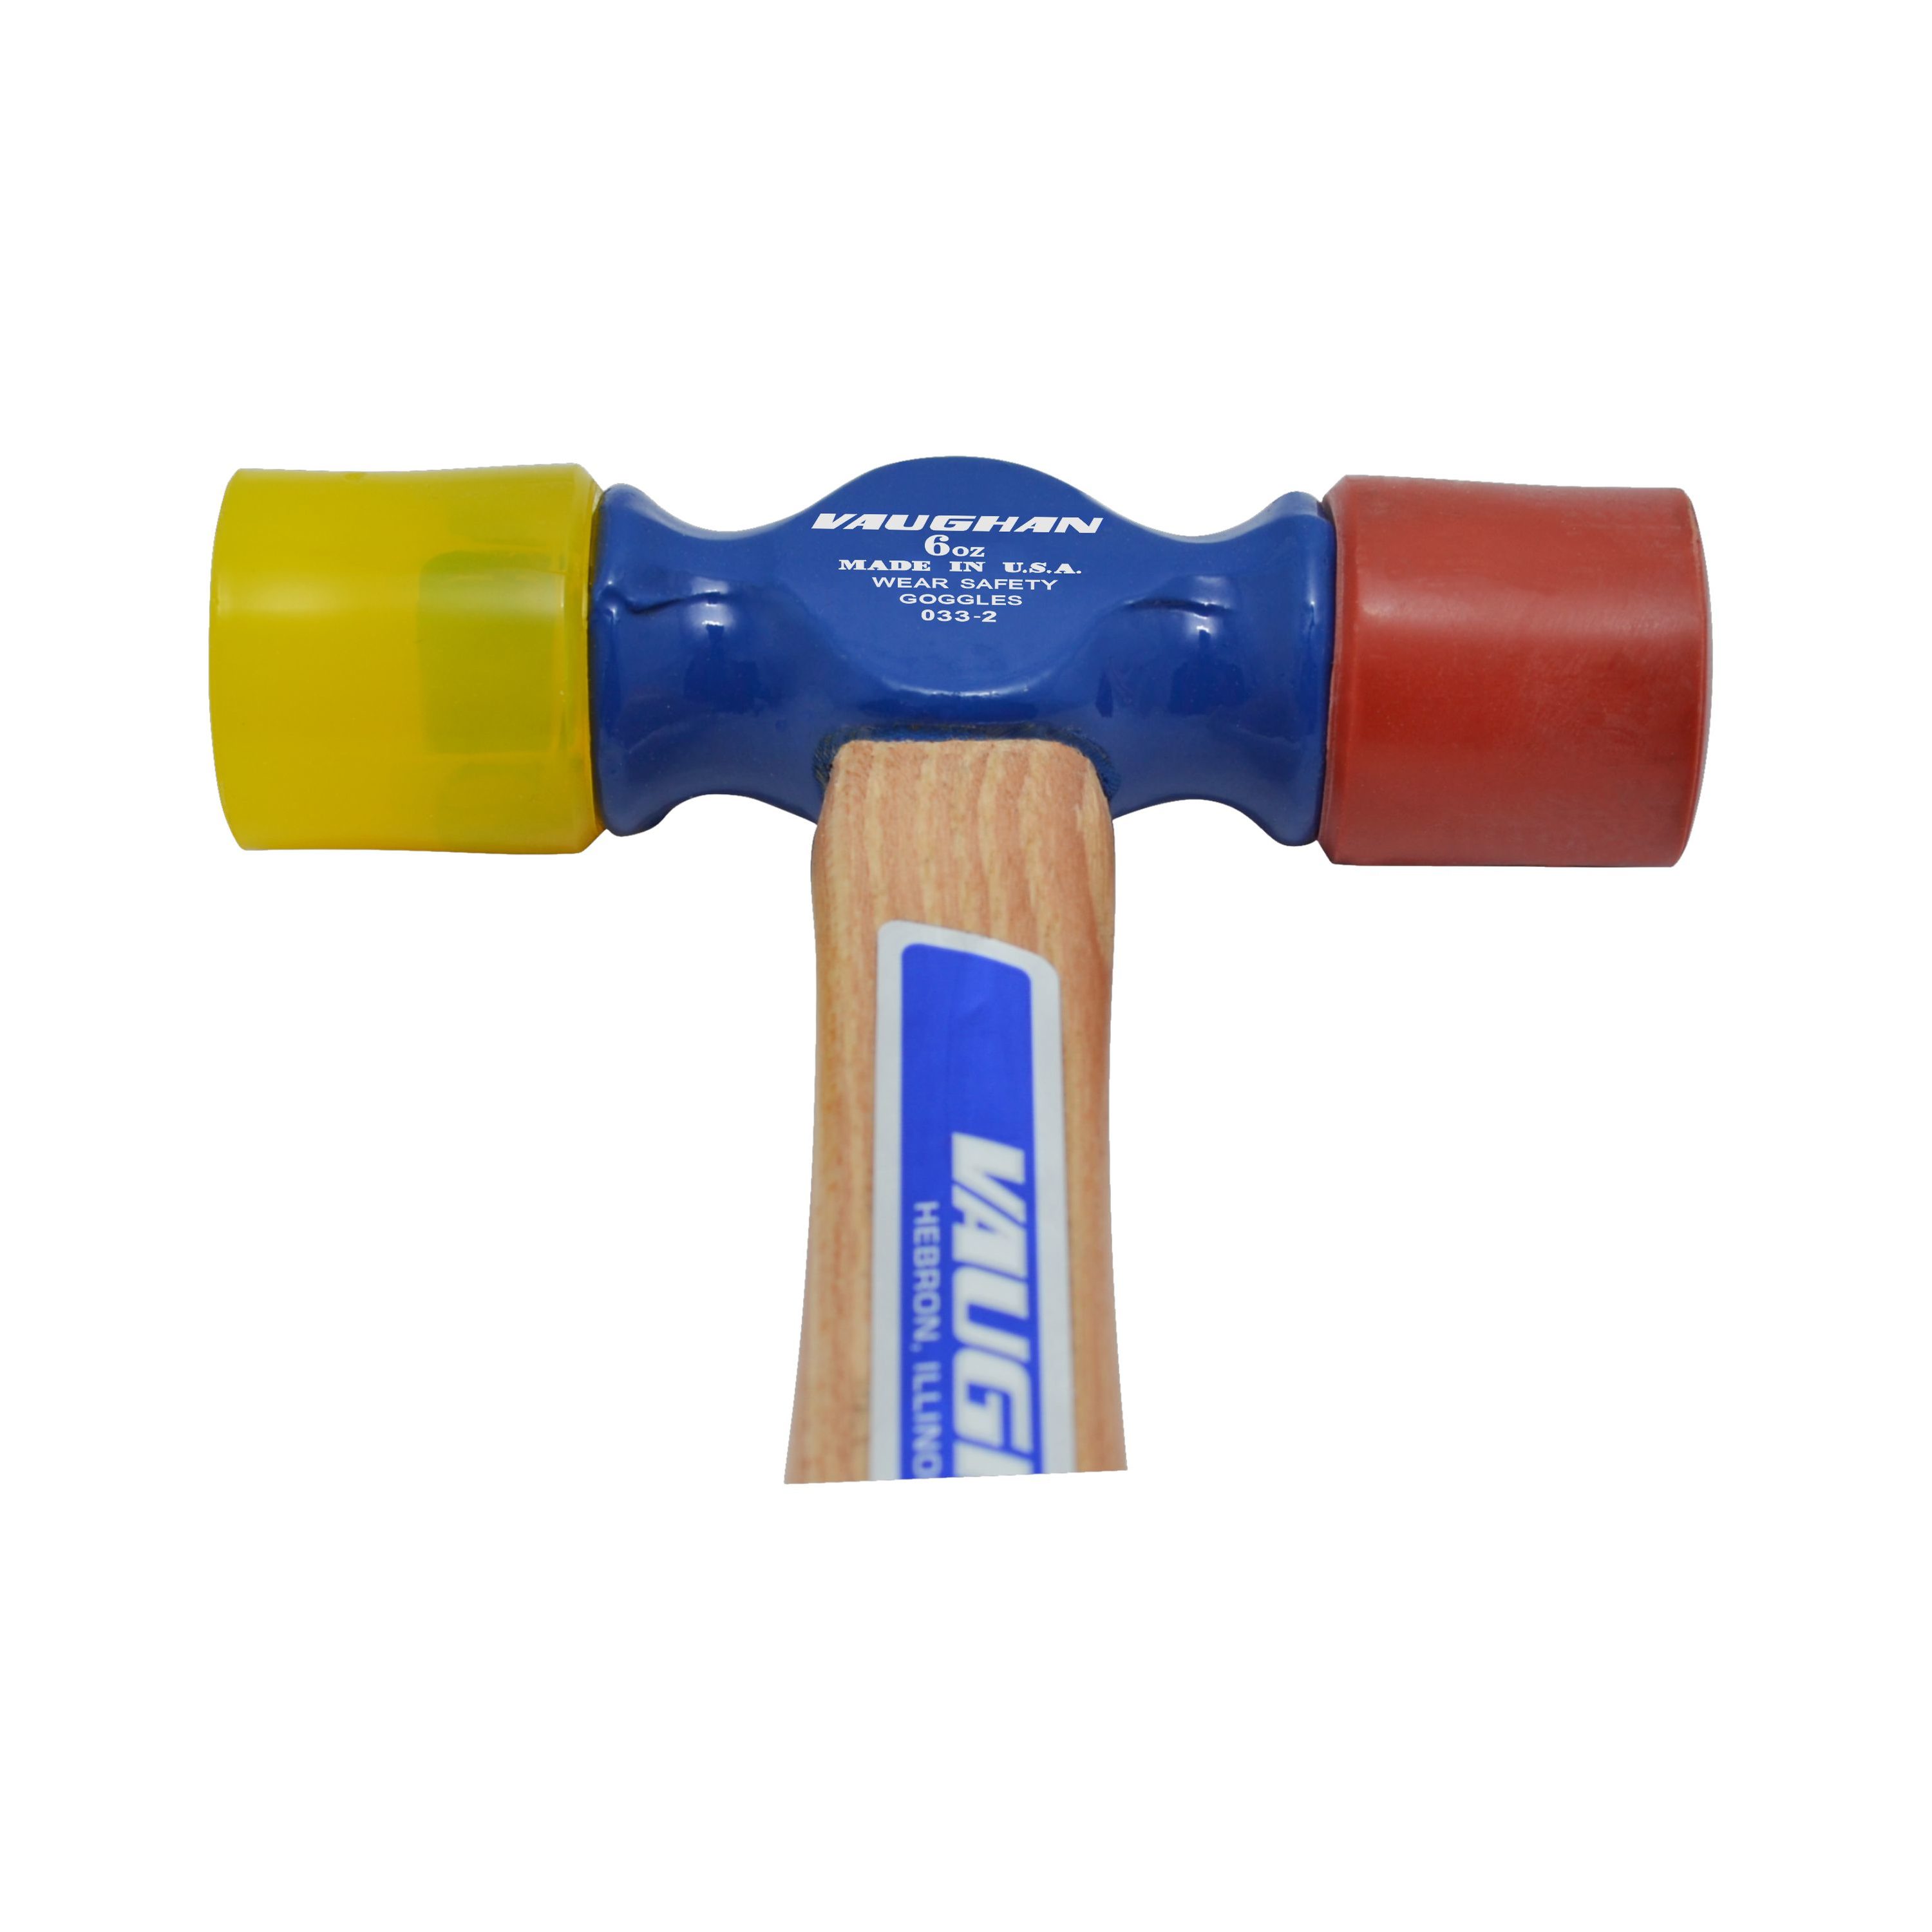 OMBREDANNE Mallet, 520gr, W/ Silicone Handle - Surgivalley